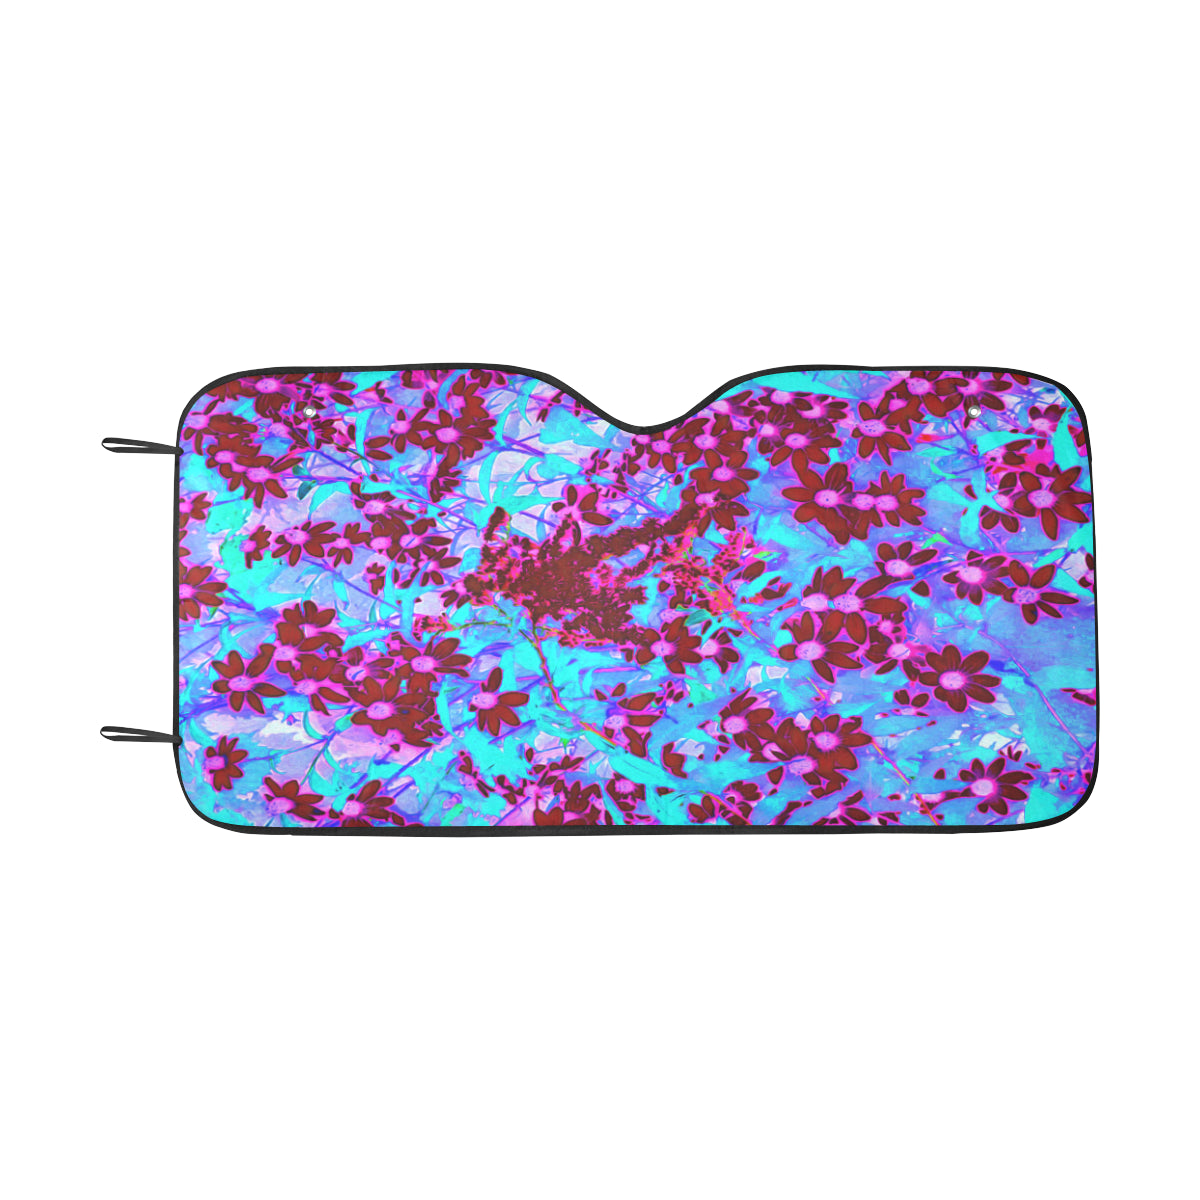 Auto Sun Shade, Crimson Red and Pink Wildflowers on Blue